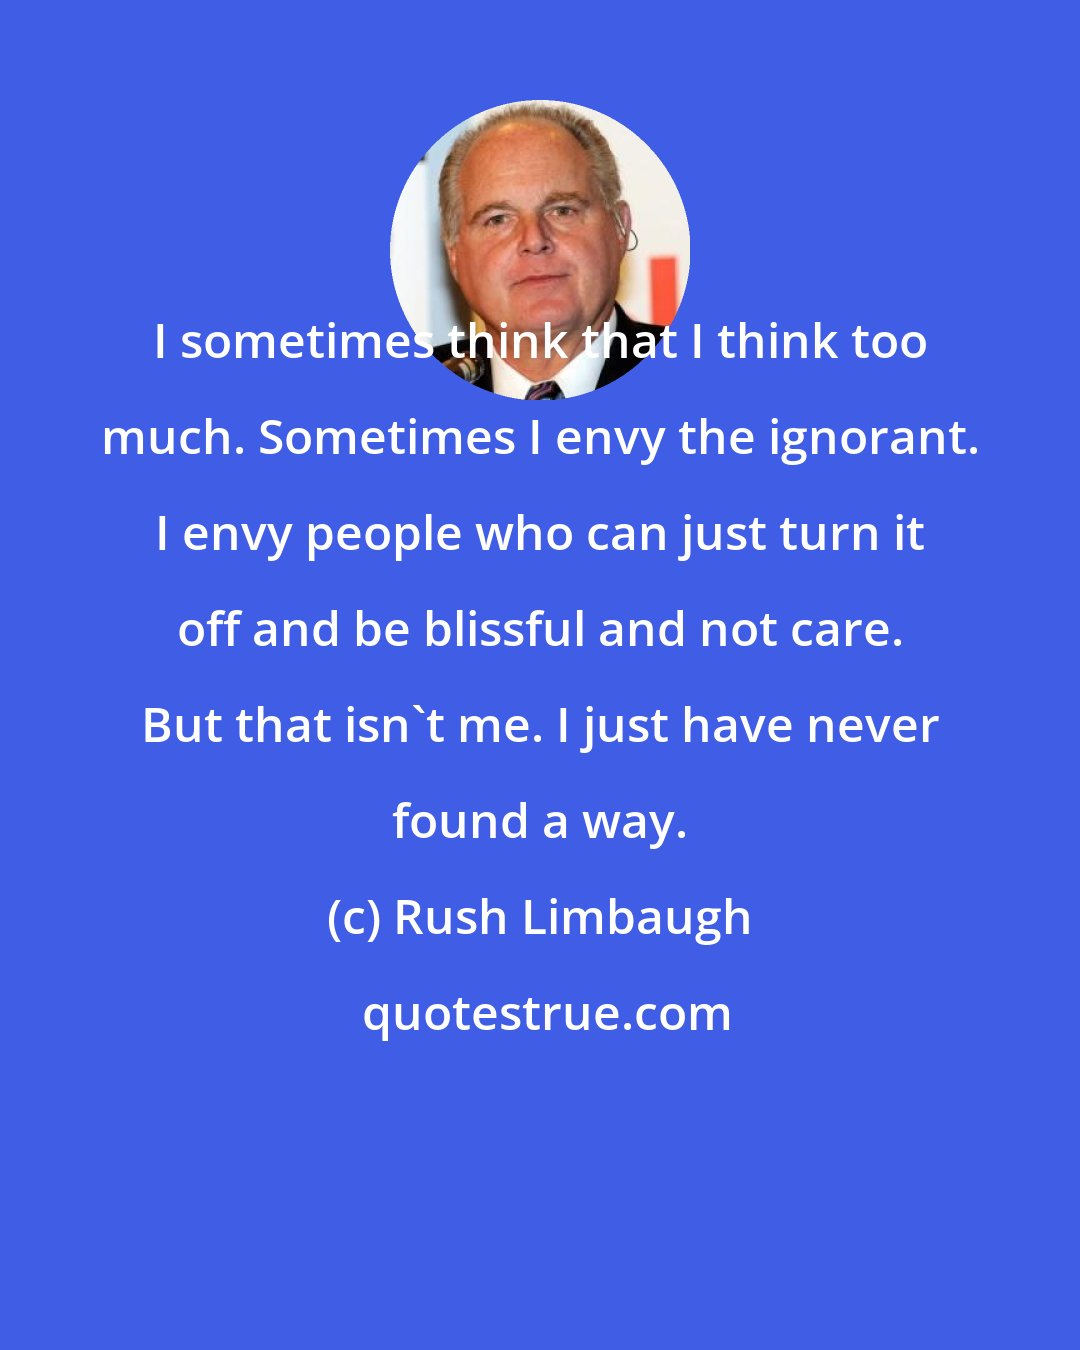 Rush Limbaugh: I sometimes think that I think too much. Sometimes I envy the ignorant. I envy people who can just turn it off and be blissful and not care. But that isn't me. I just have never found a way.